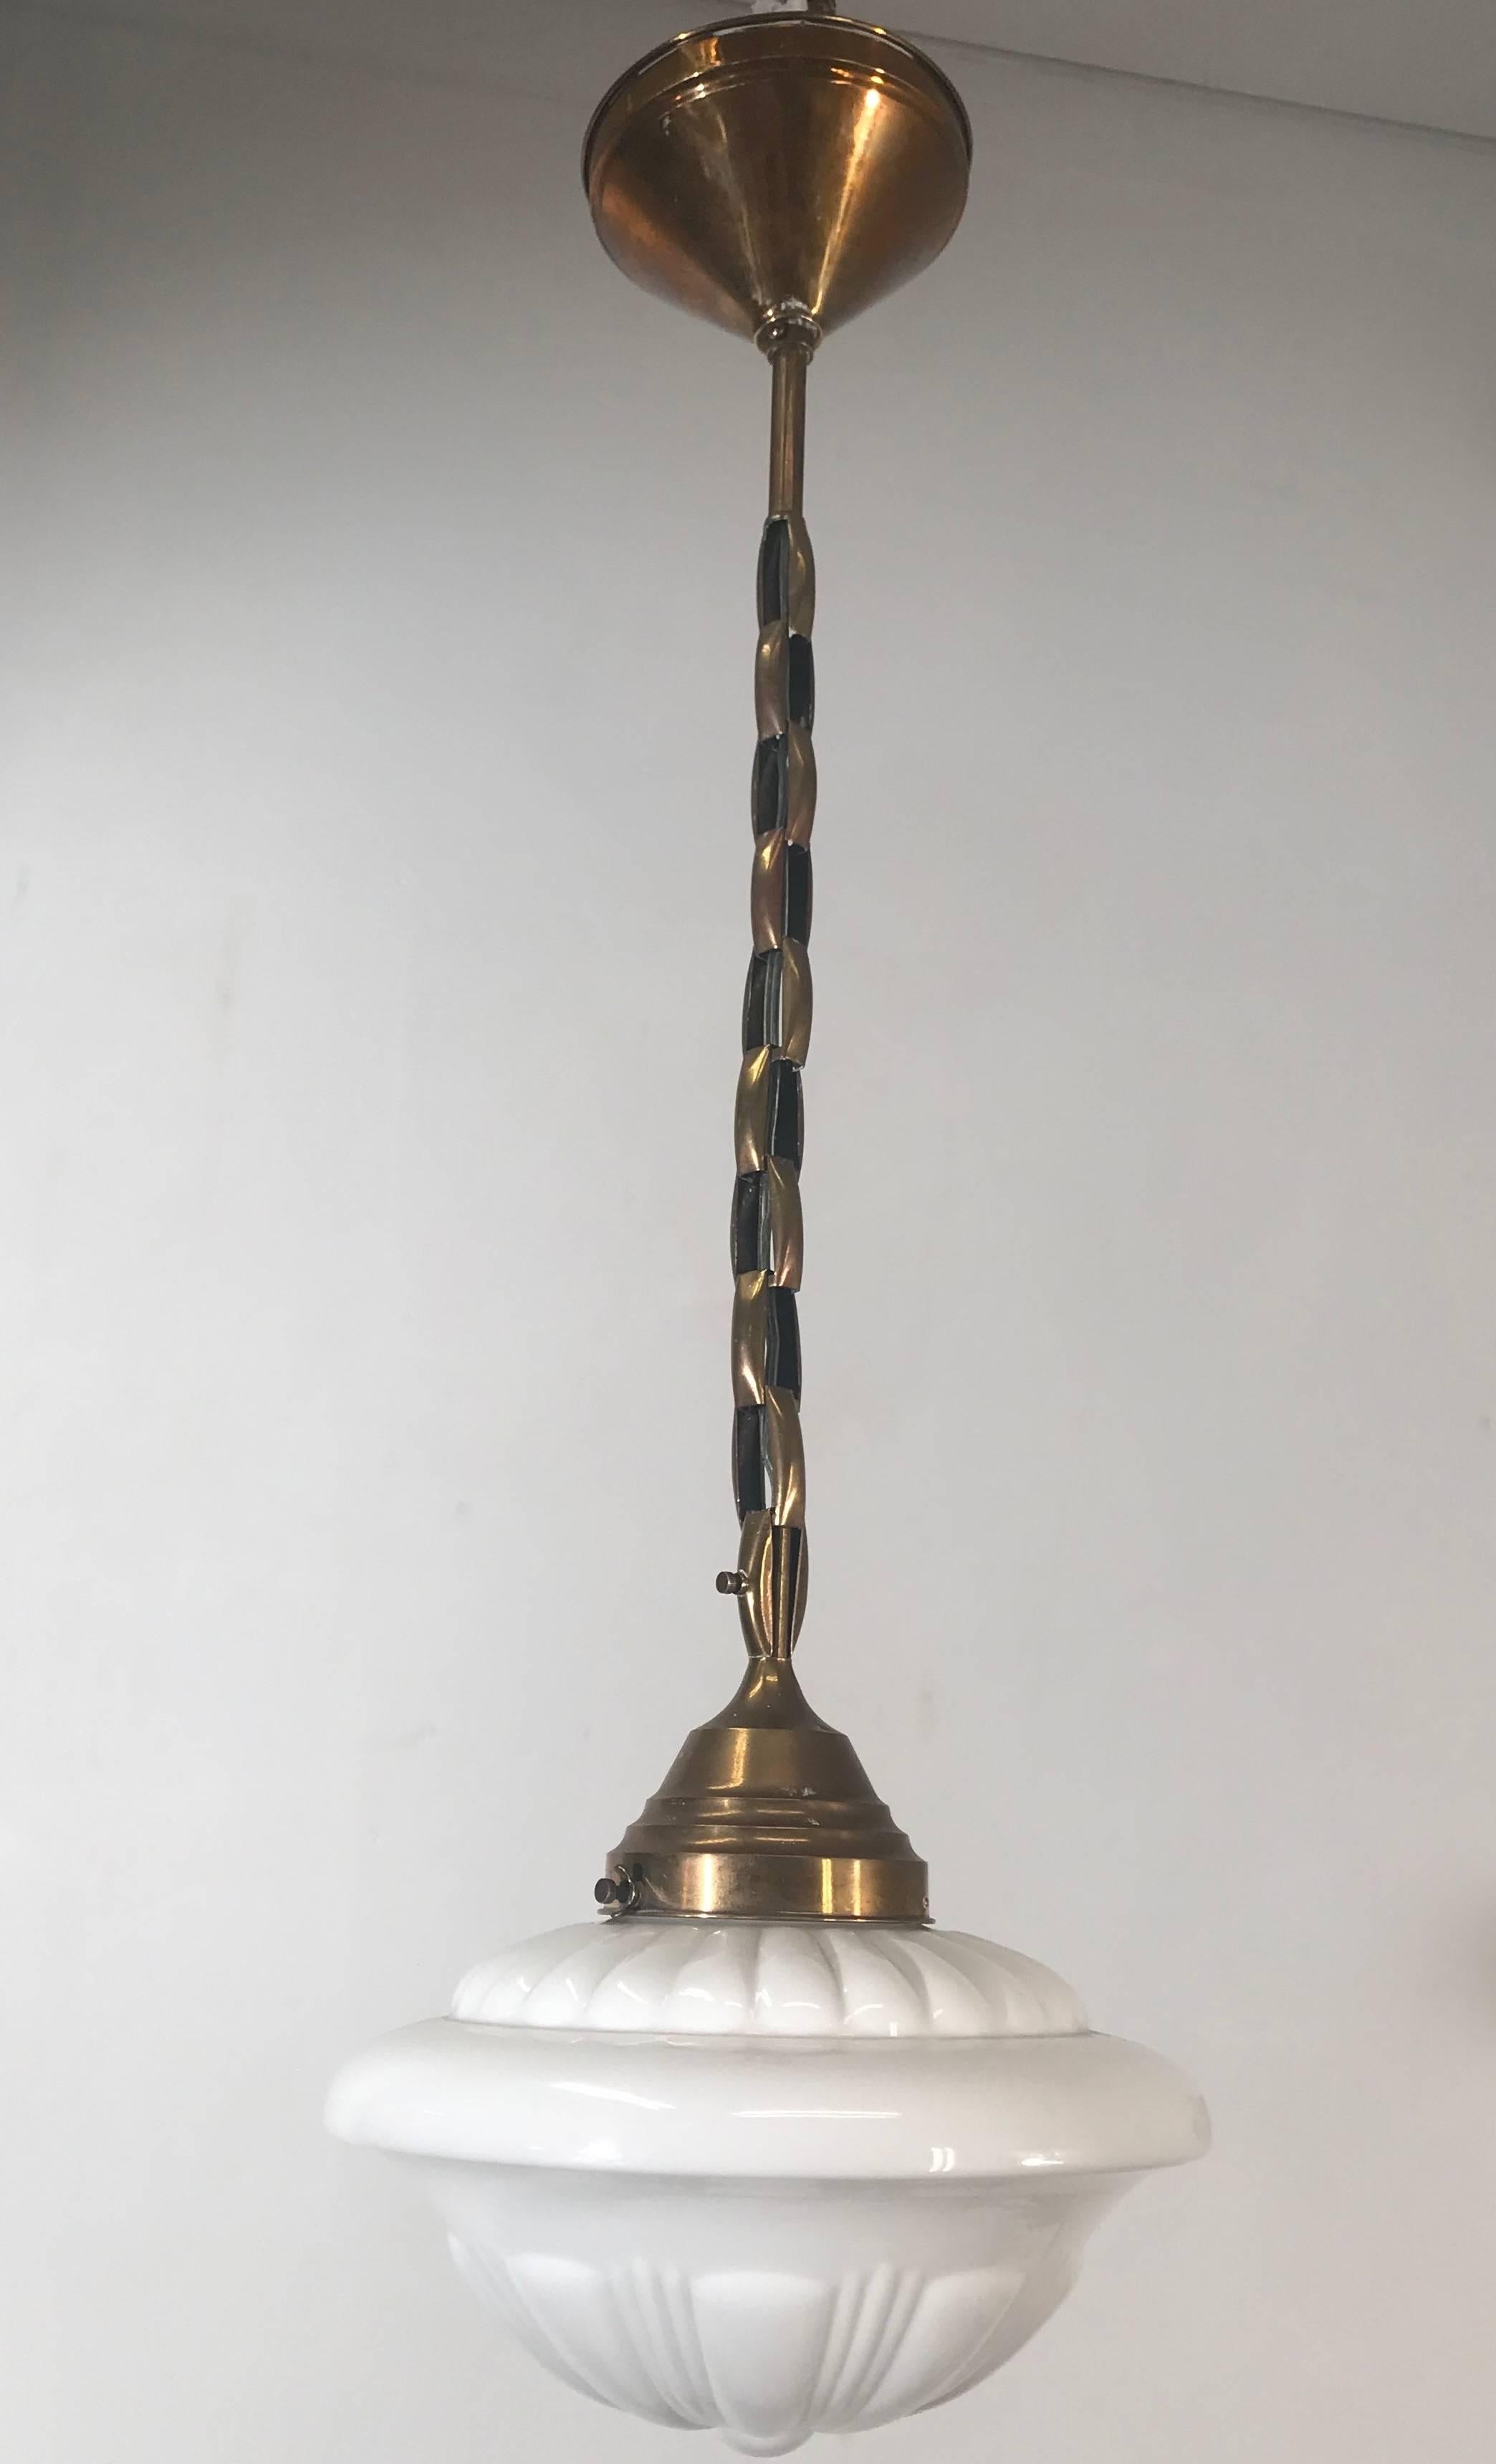 Early 1900s Rare Art Deco Pendant / Light Fixture with Glass Shade & Brass Chain 7